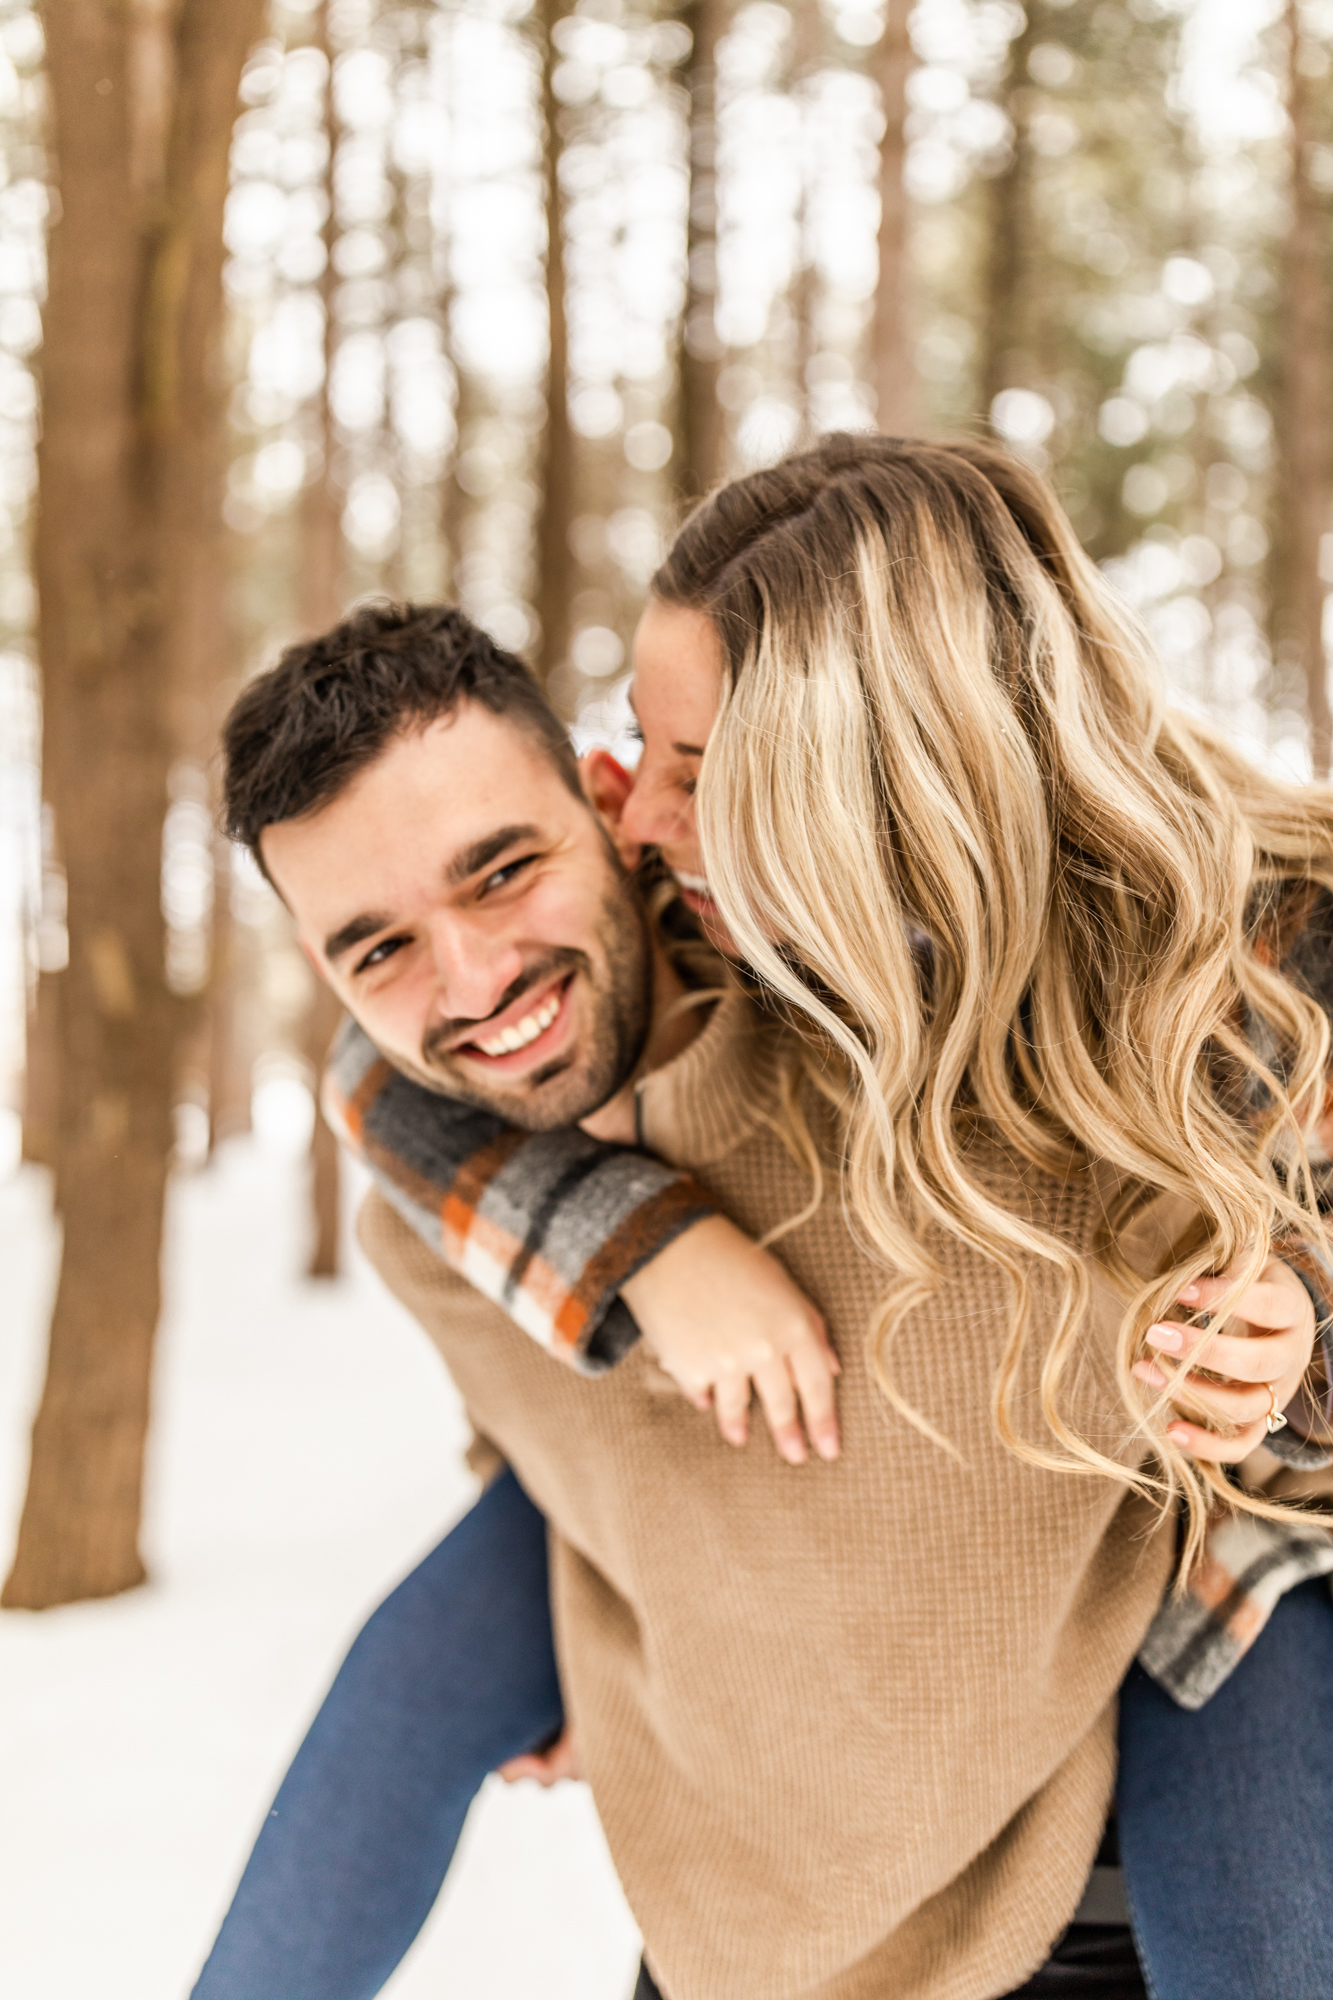 Man carrying woman on his back and smiling in candid engagement photos in winter snowy forest